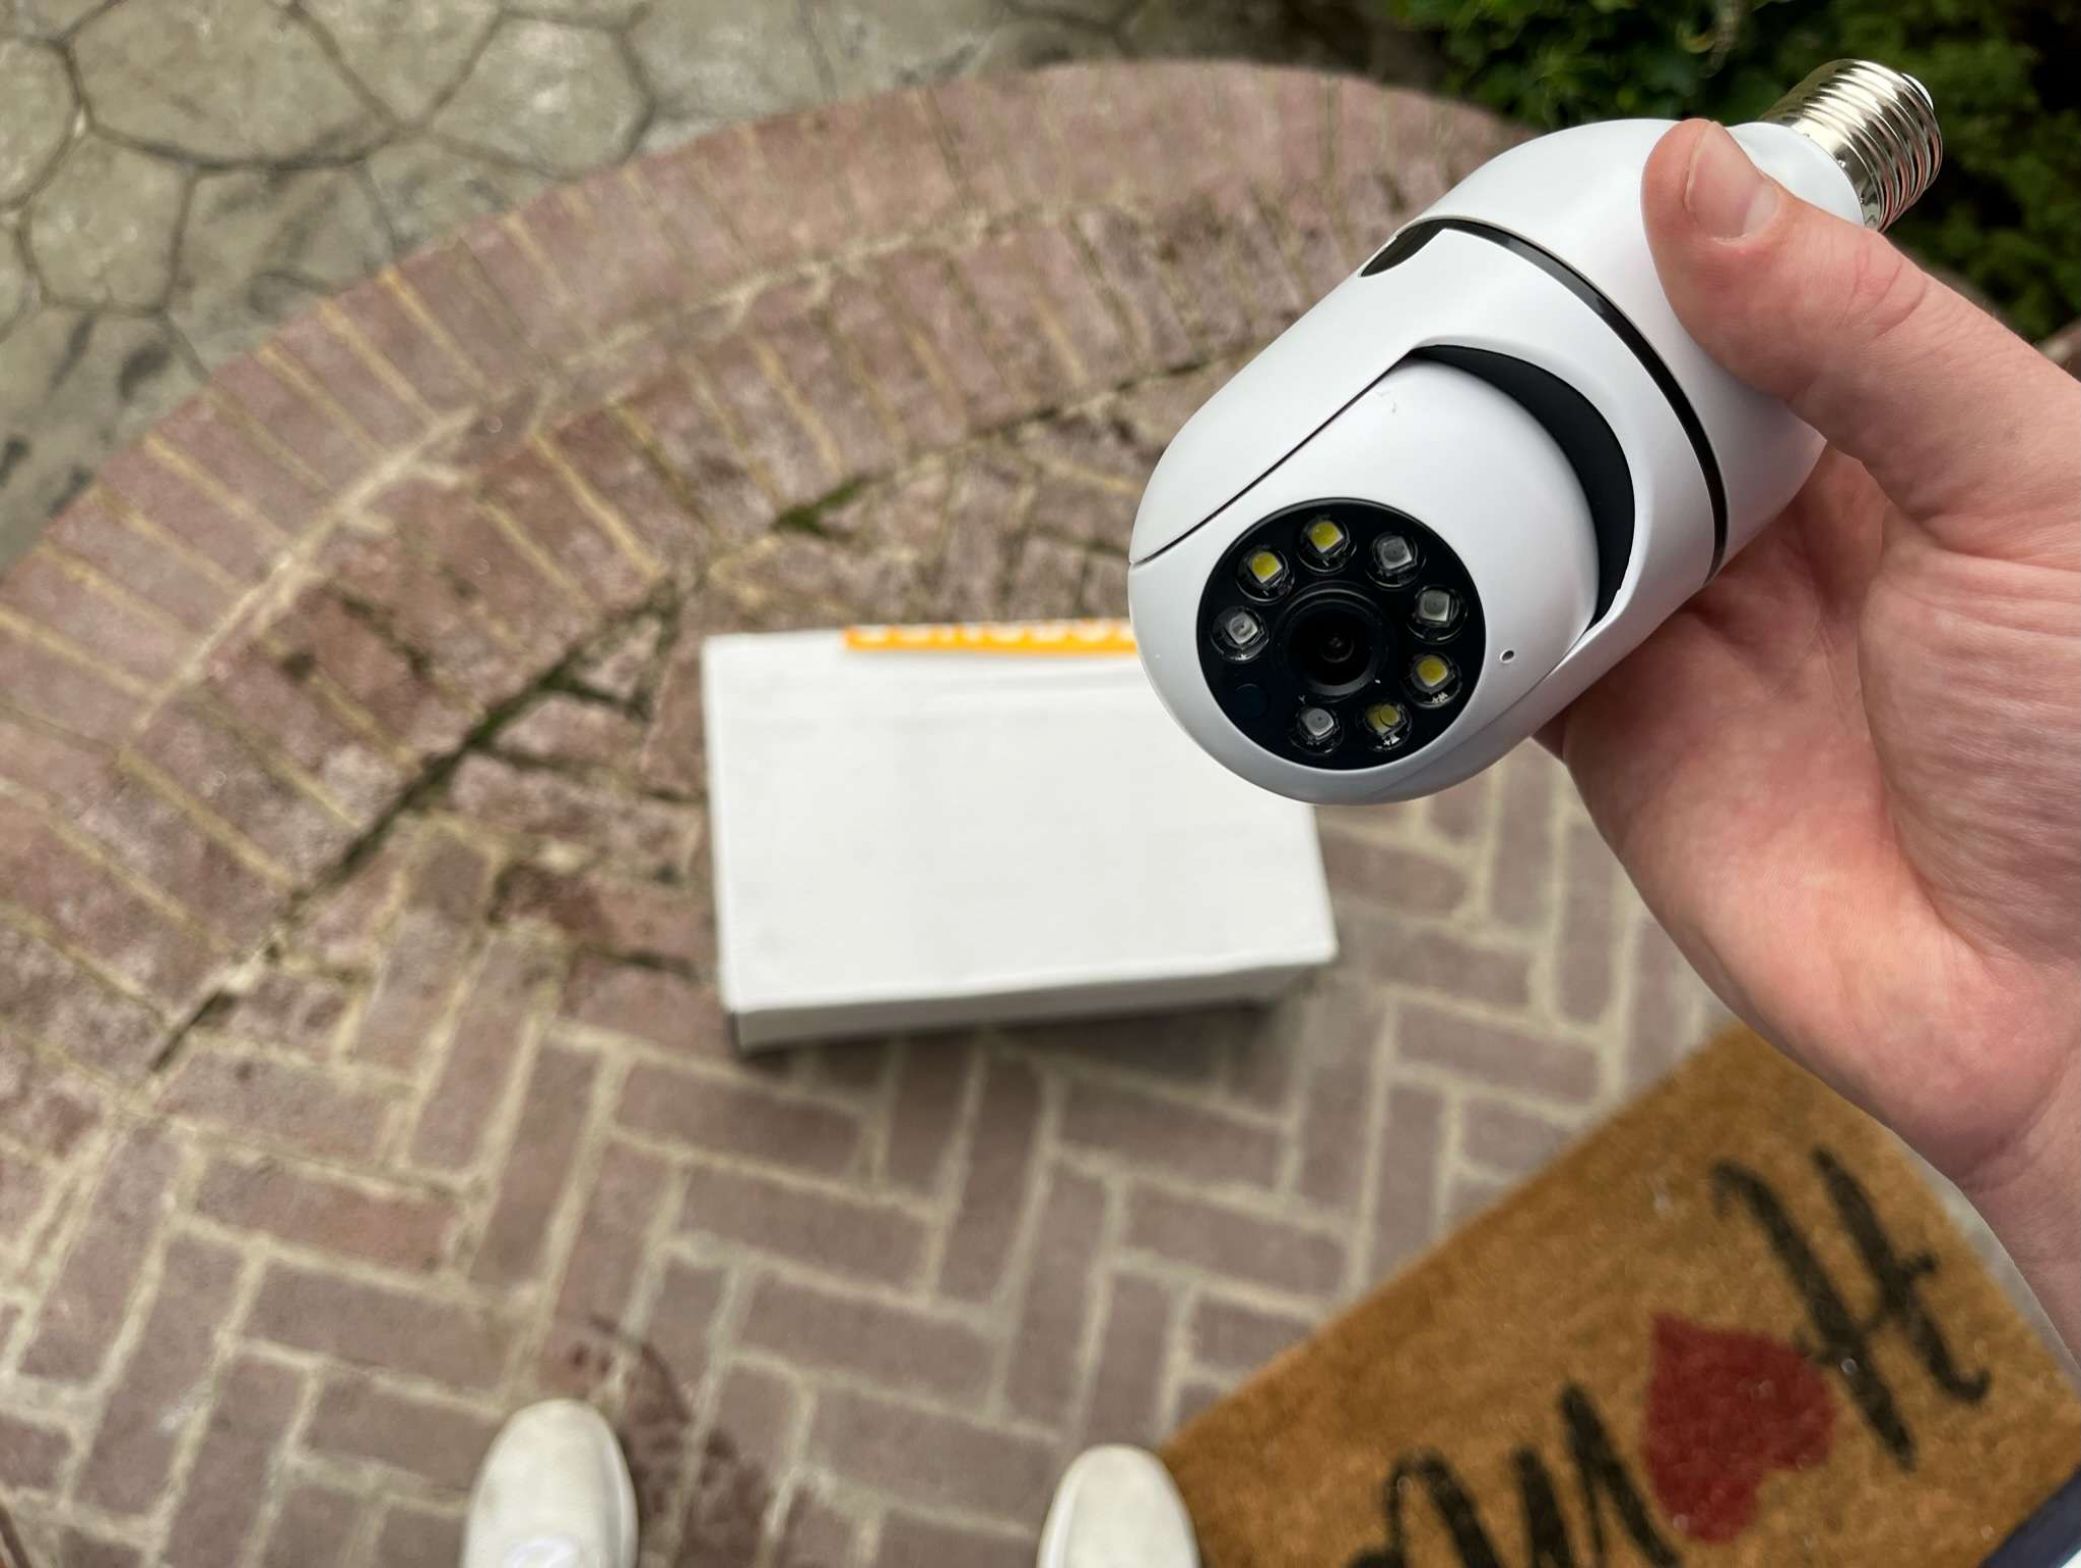 Customer Opinion About Nomad Security Camera